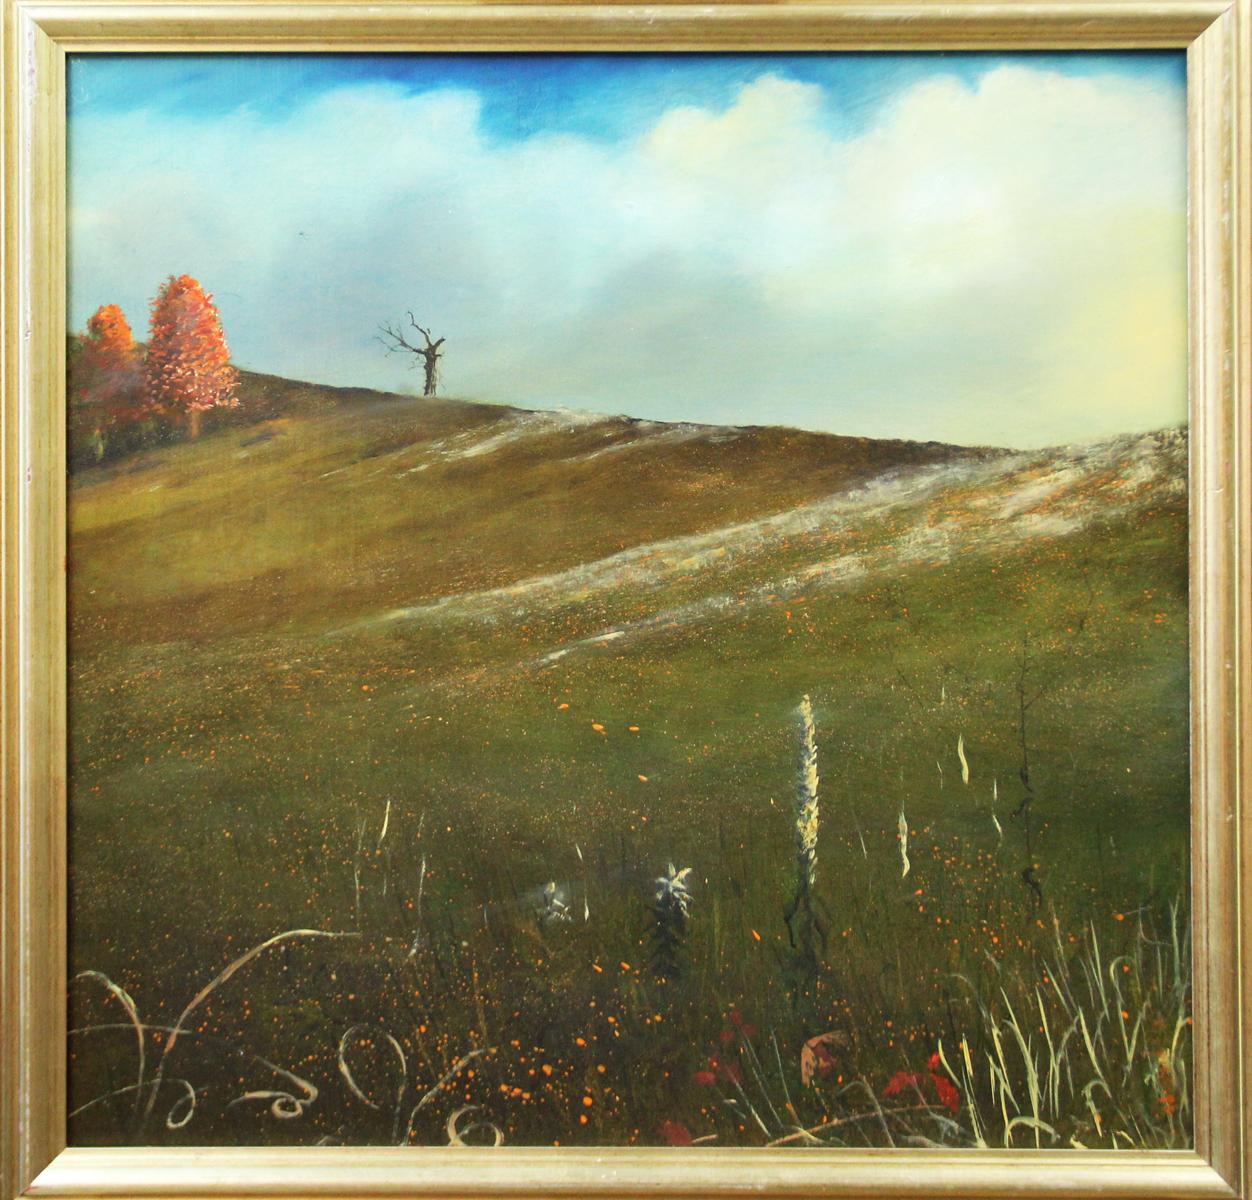 James Lynch Landscape Painting - James "Jimmy" Lynch, Rich Hollow, Oil on Panel, 1994